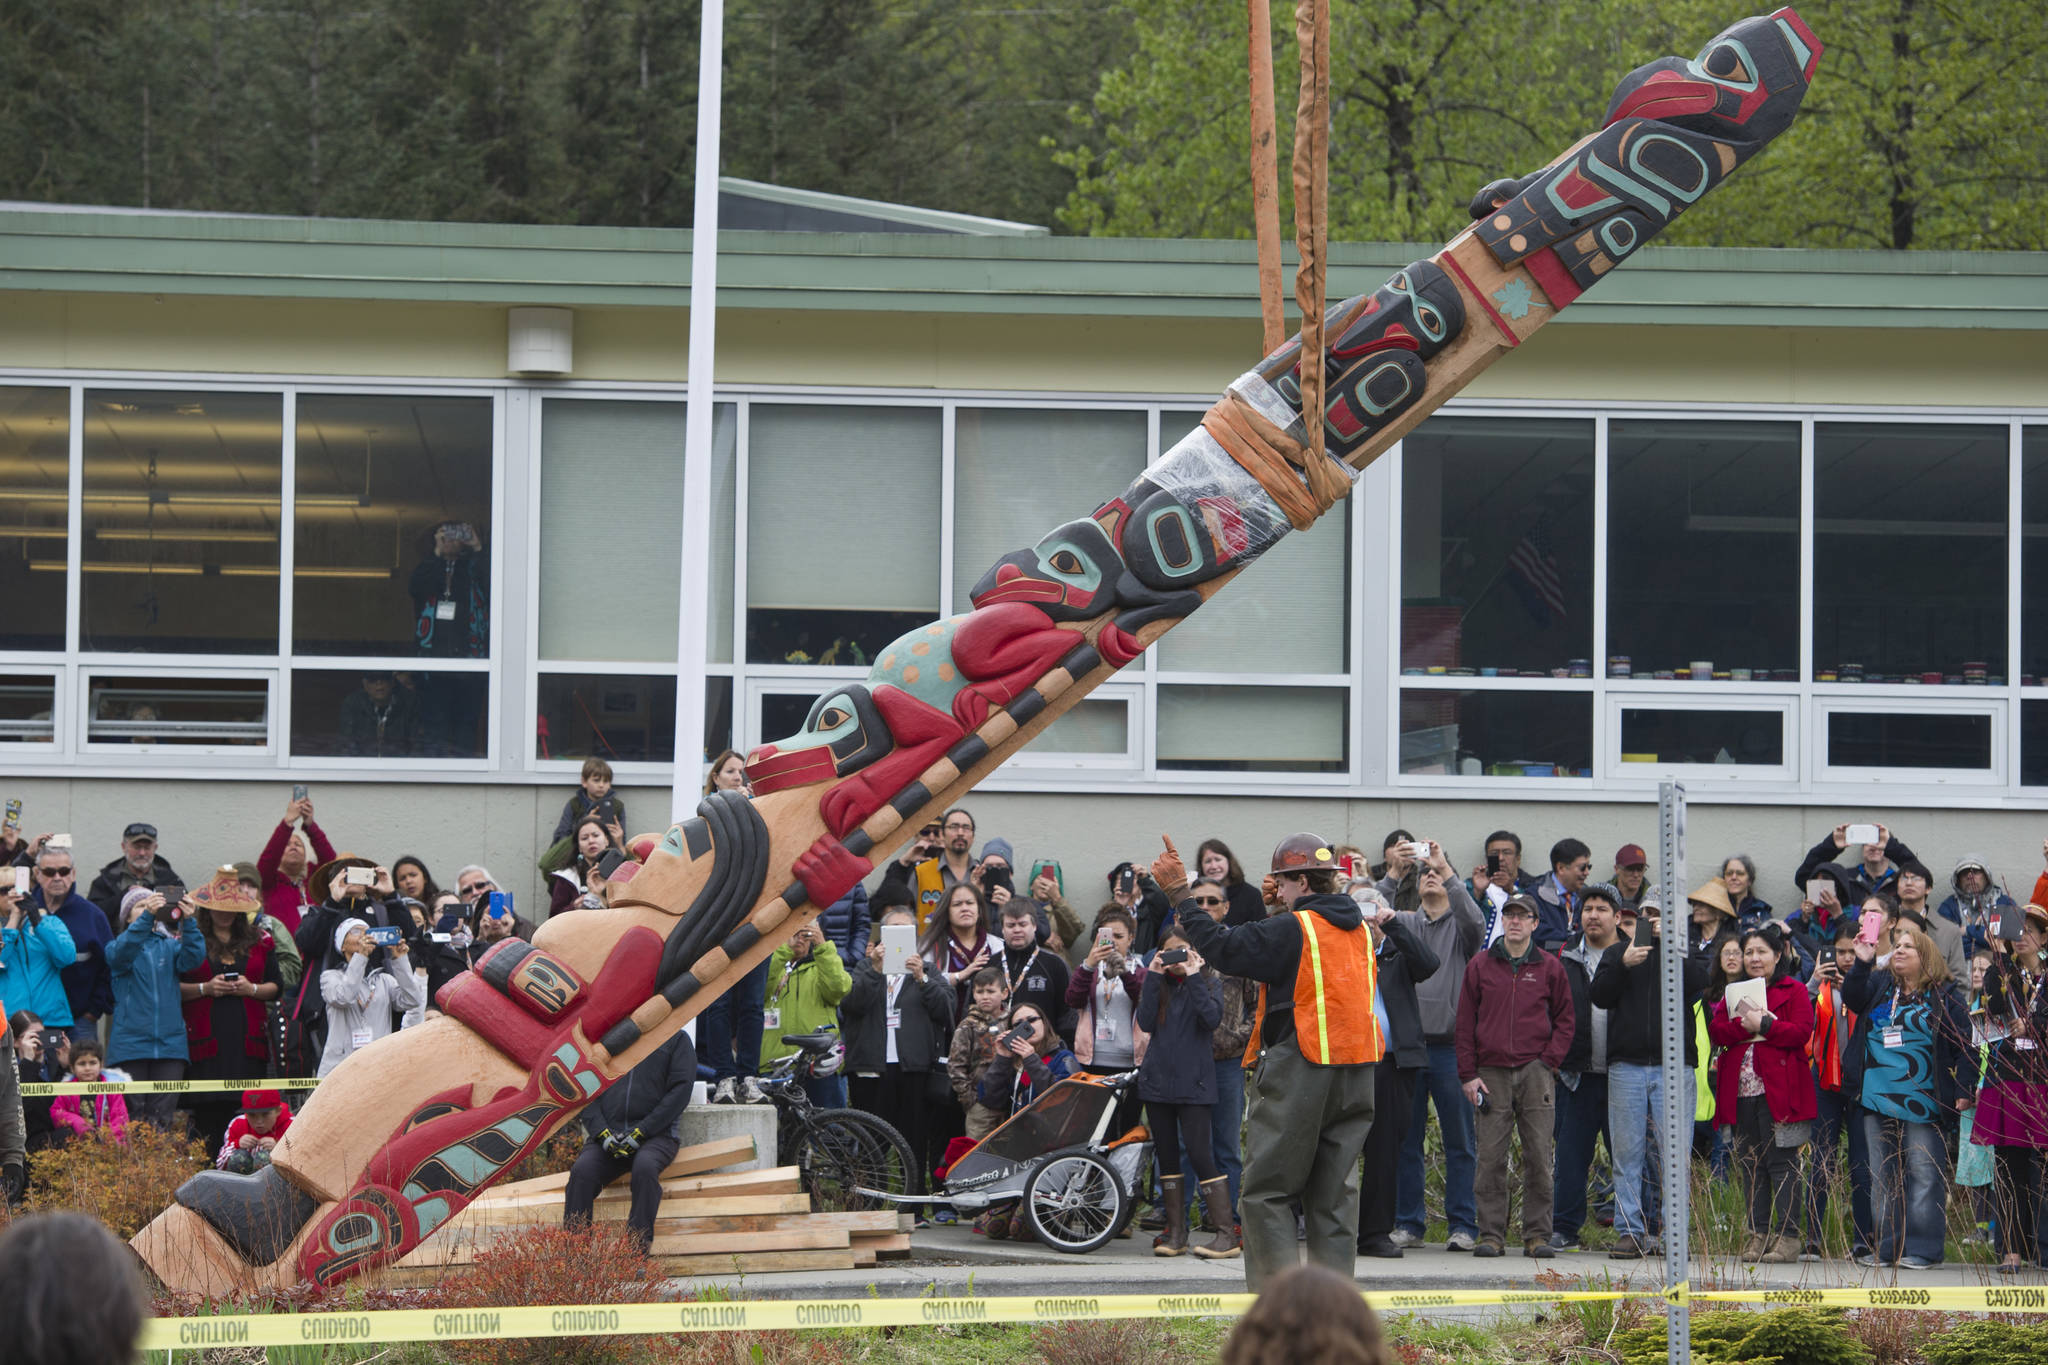 Juneau residents watch as a raven totem pole is lifted into place by Trucano Constructuion at Gastineau Elementary School on Saturday, May 13, 2017. The 26-foot pole, paid for by the Goldbelt Heritage Foundation, honors the Gaanaxteid&